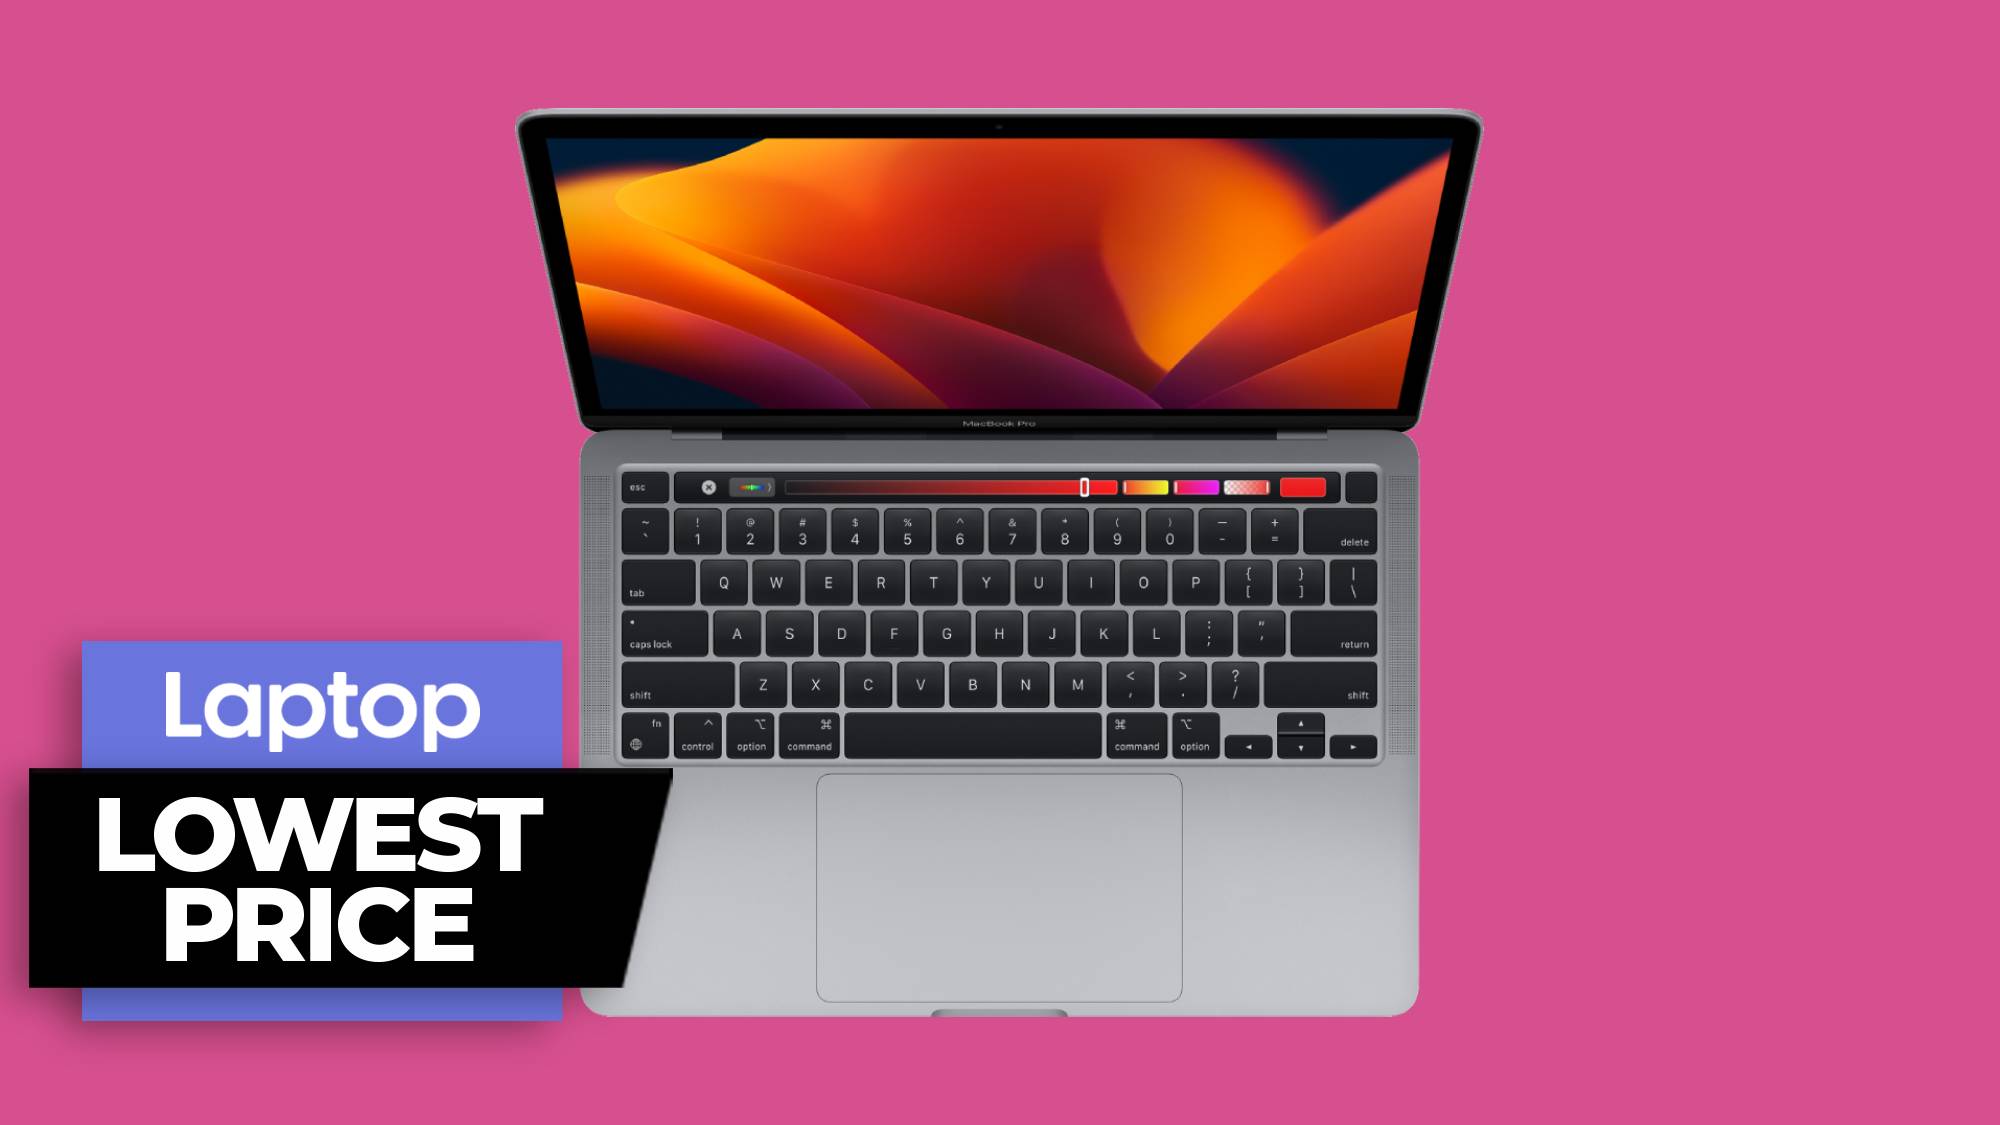 Take the M2 Pro MacBook Pro to college and save $250